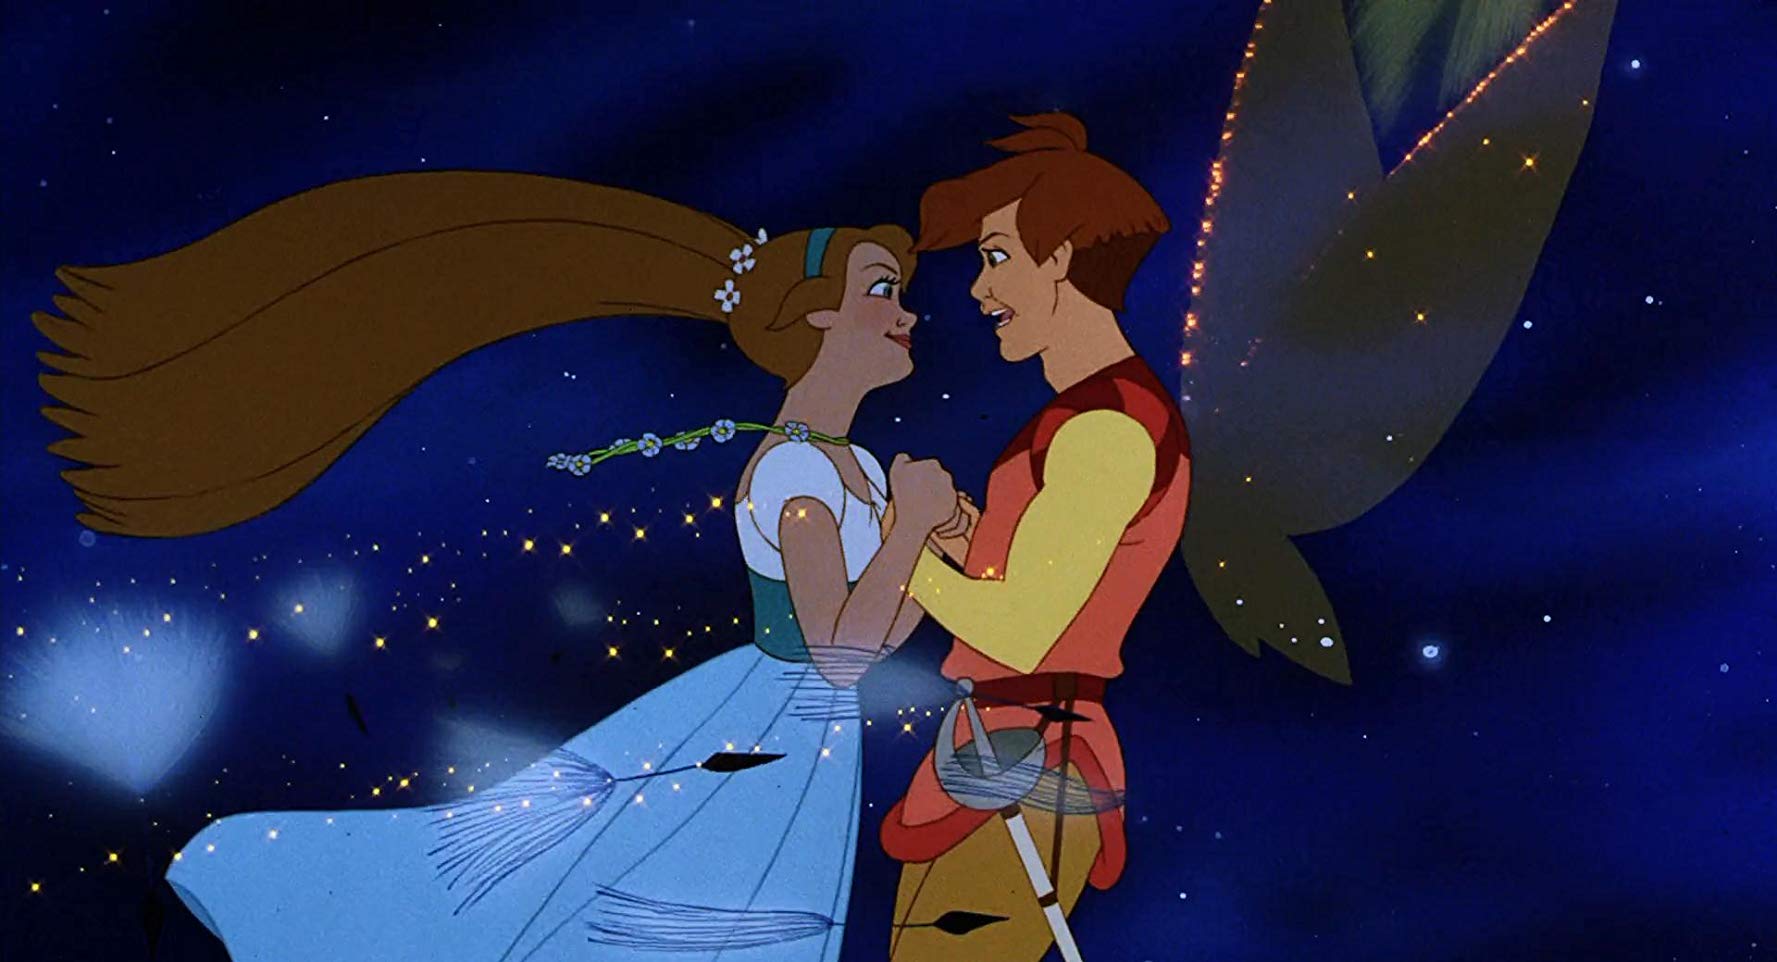 Thumbelina (voiced by Jodi Benson) and the fairy prince Cornelius (voiced by Gary Imhoff) in Thumbelina (1994)